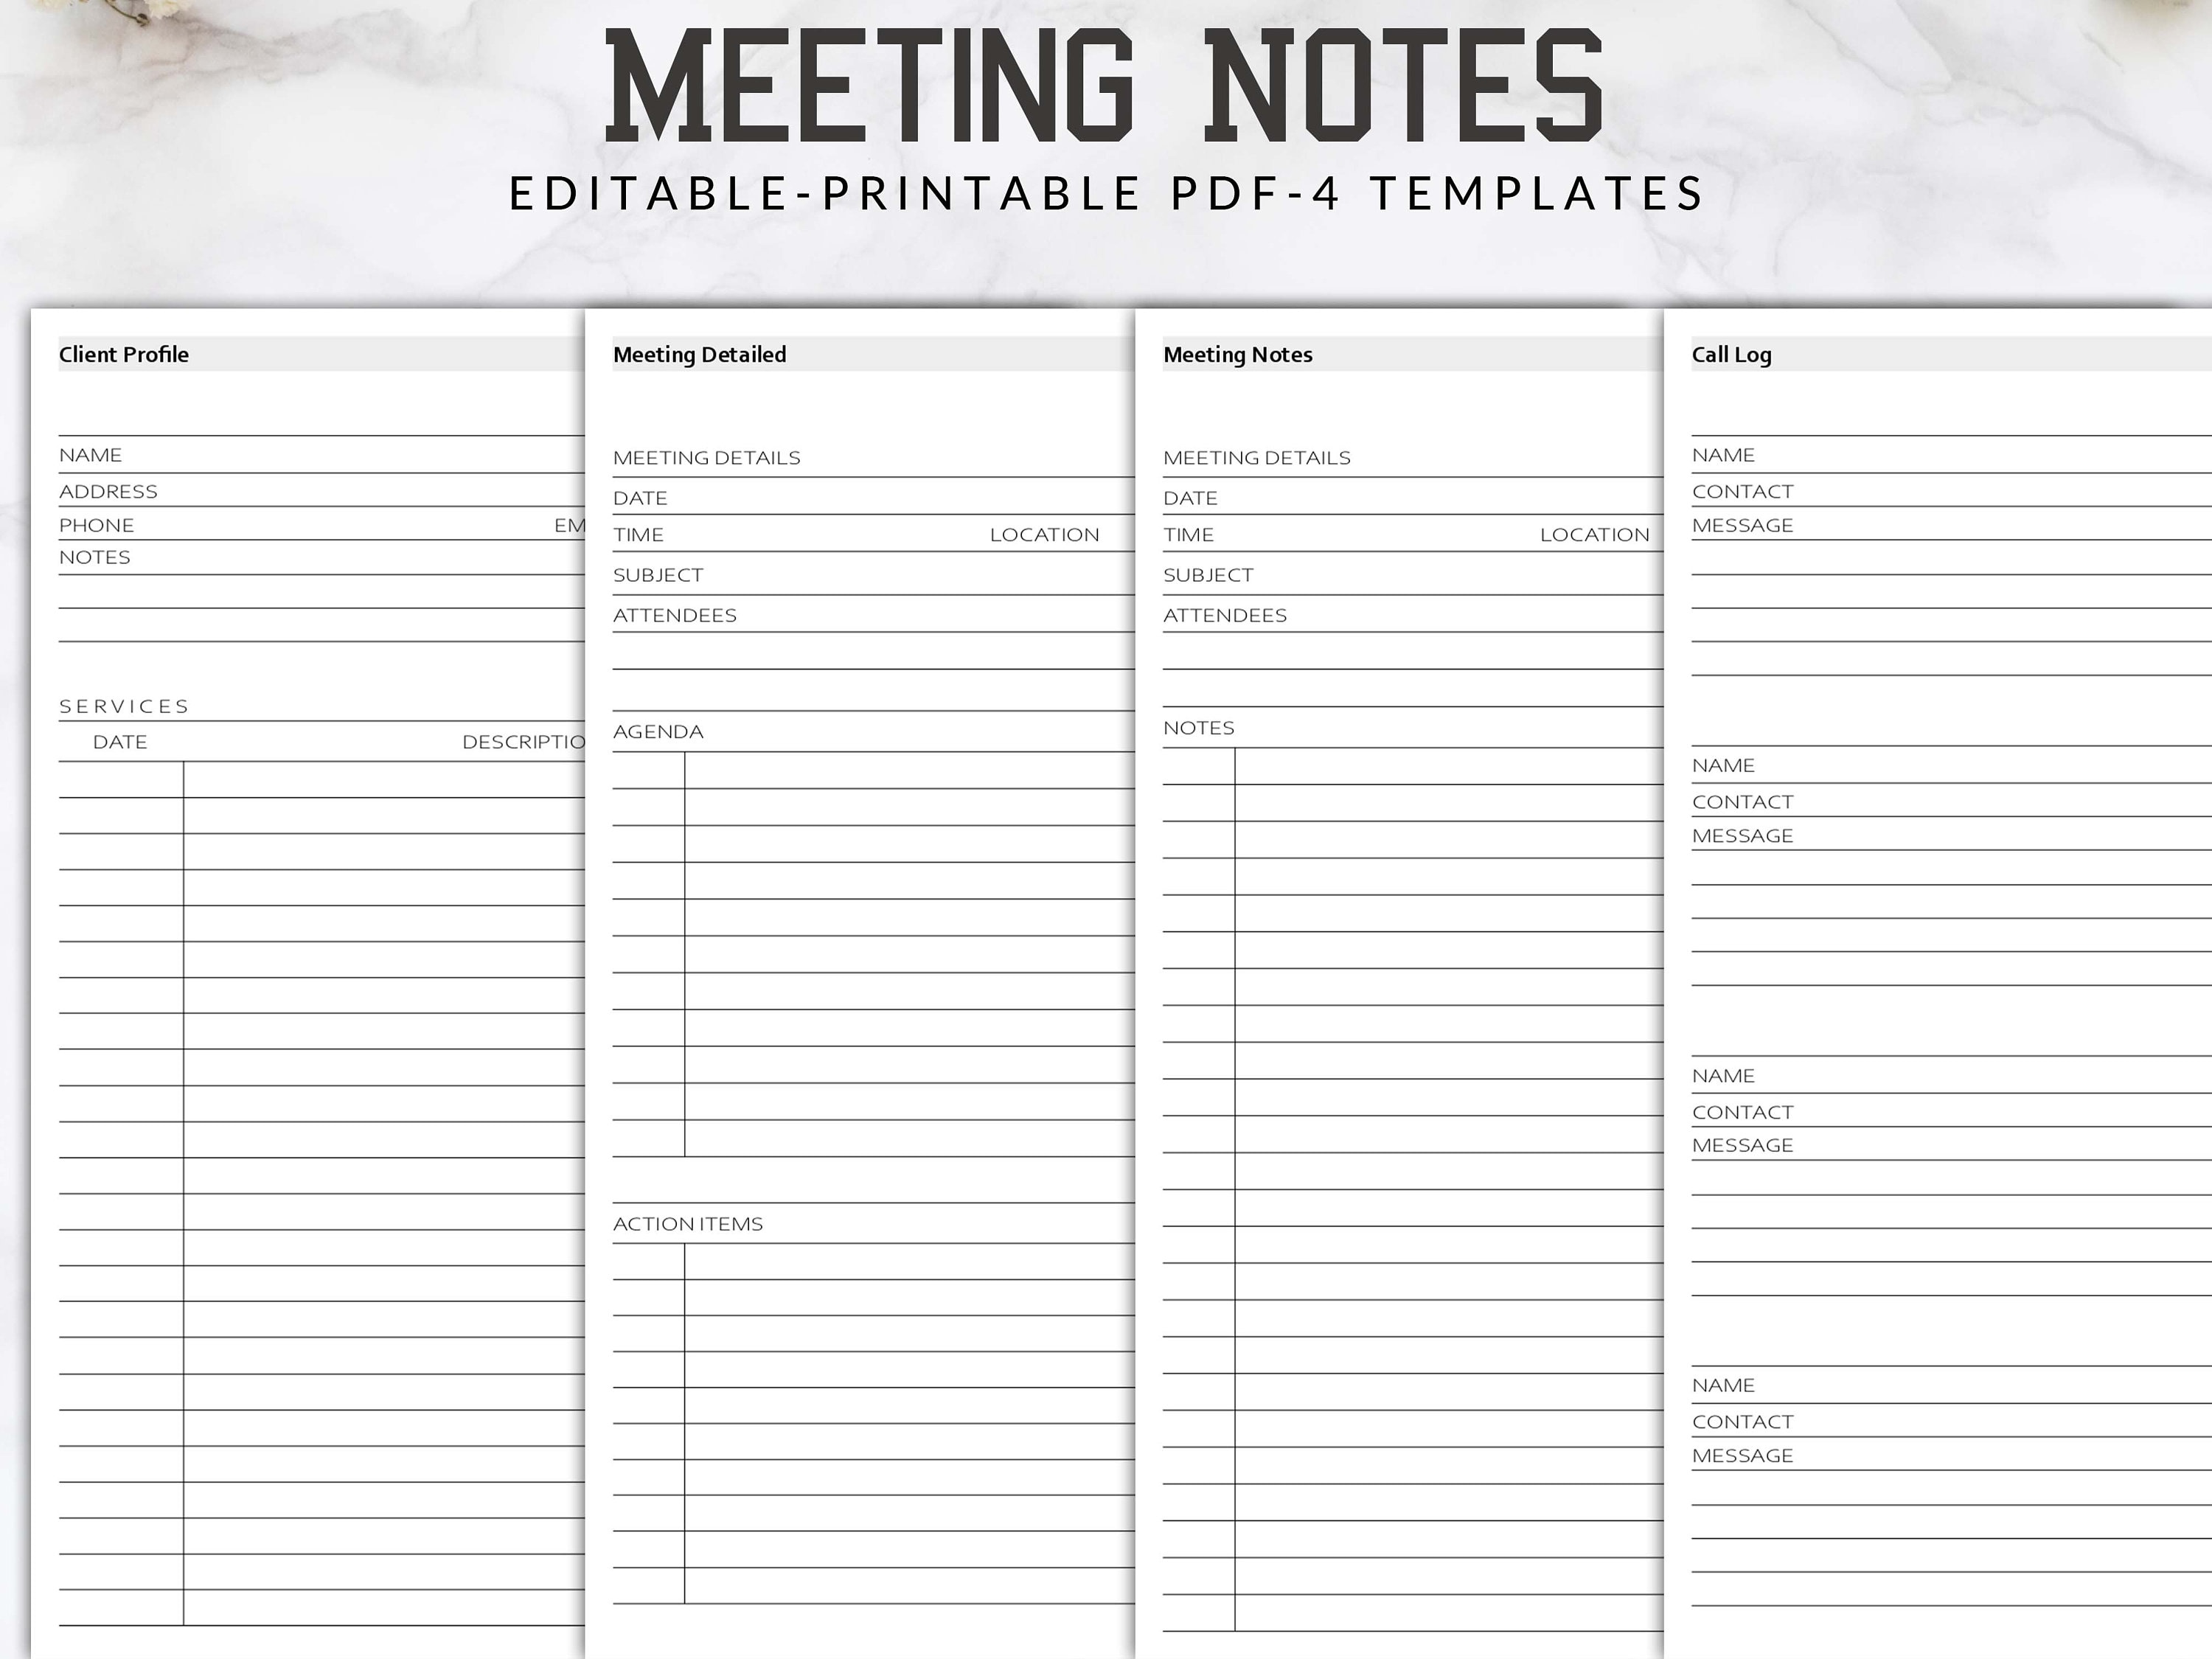 Meeting Notes template for paperless use on iPad or tablet – Infozio